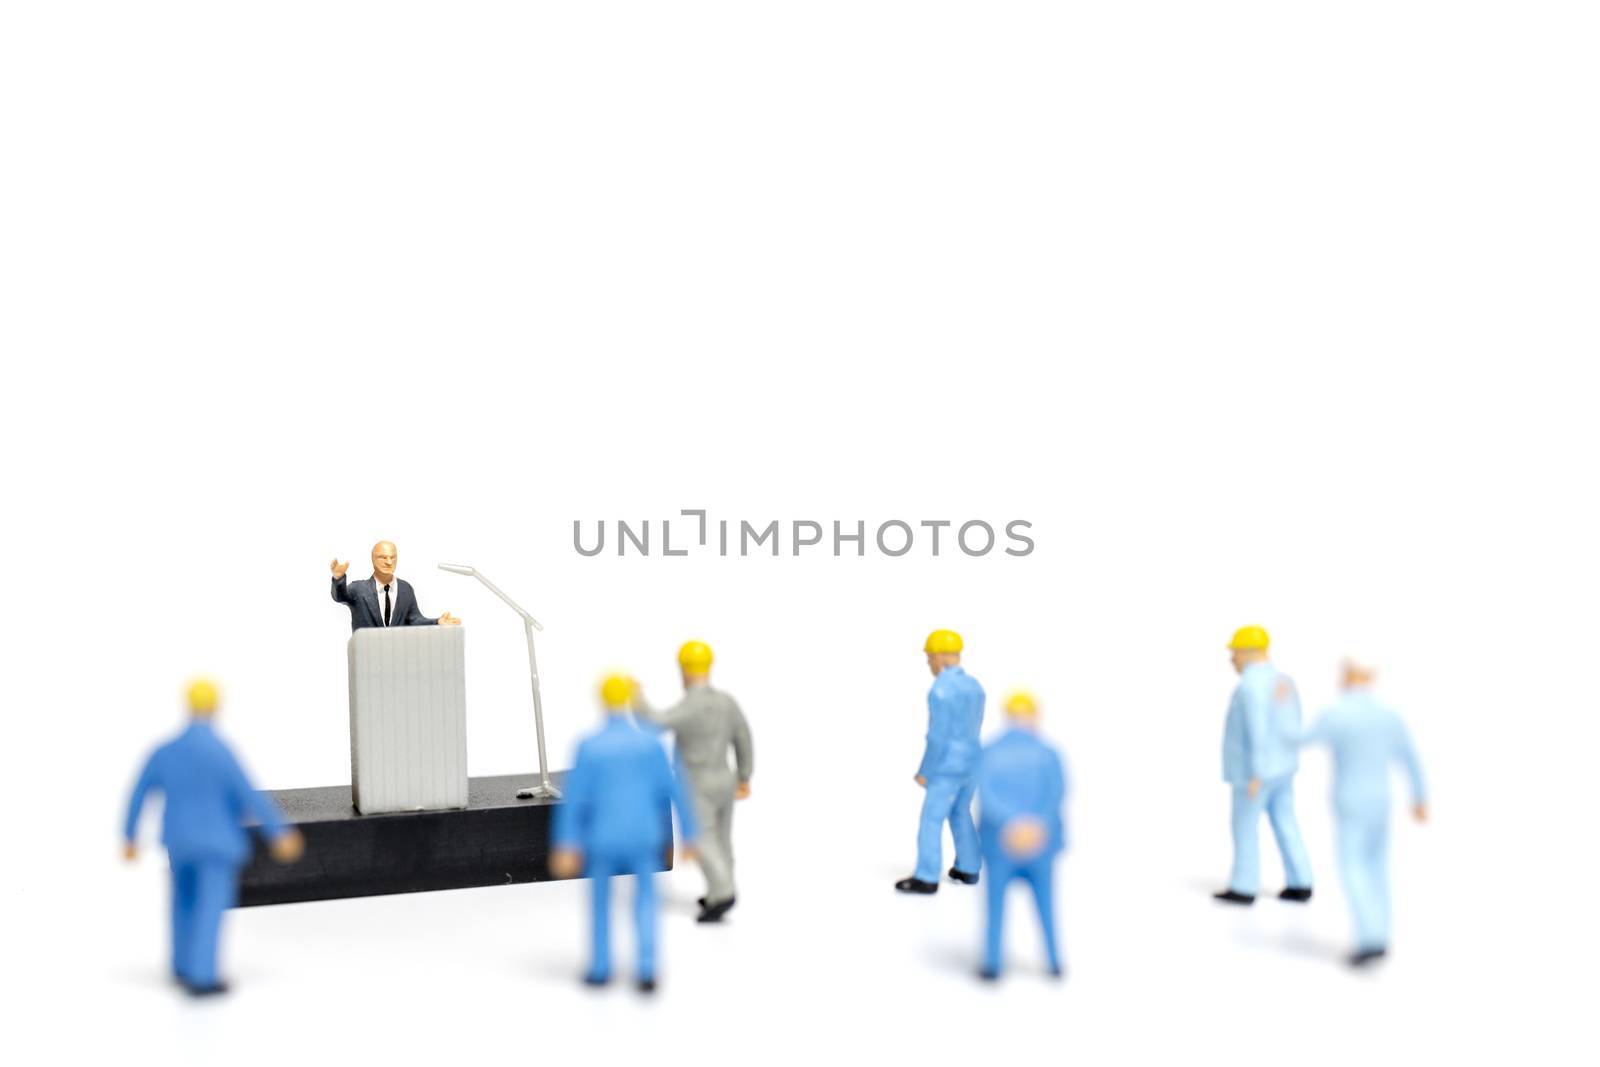 Miniature people : a politician speaking to the people during an election rally 